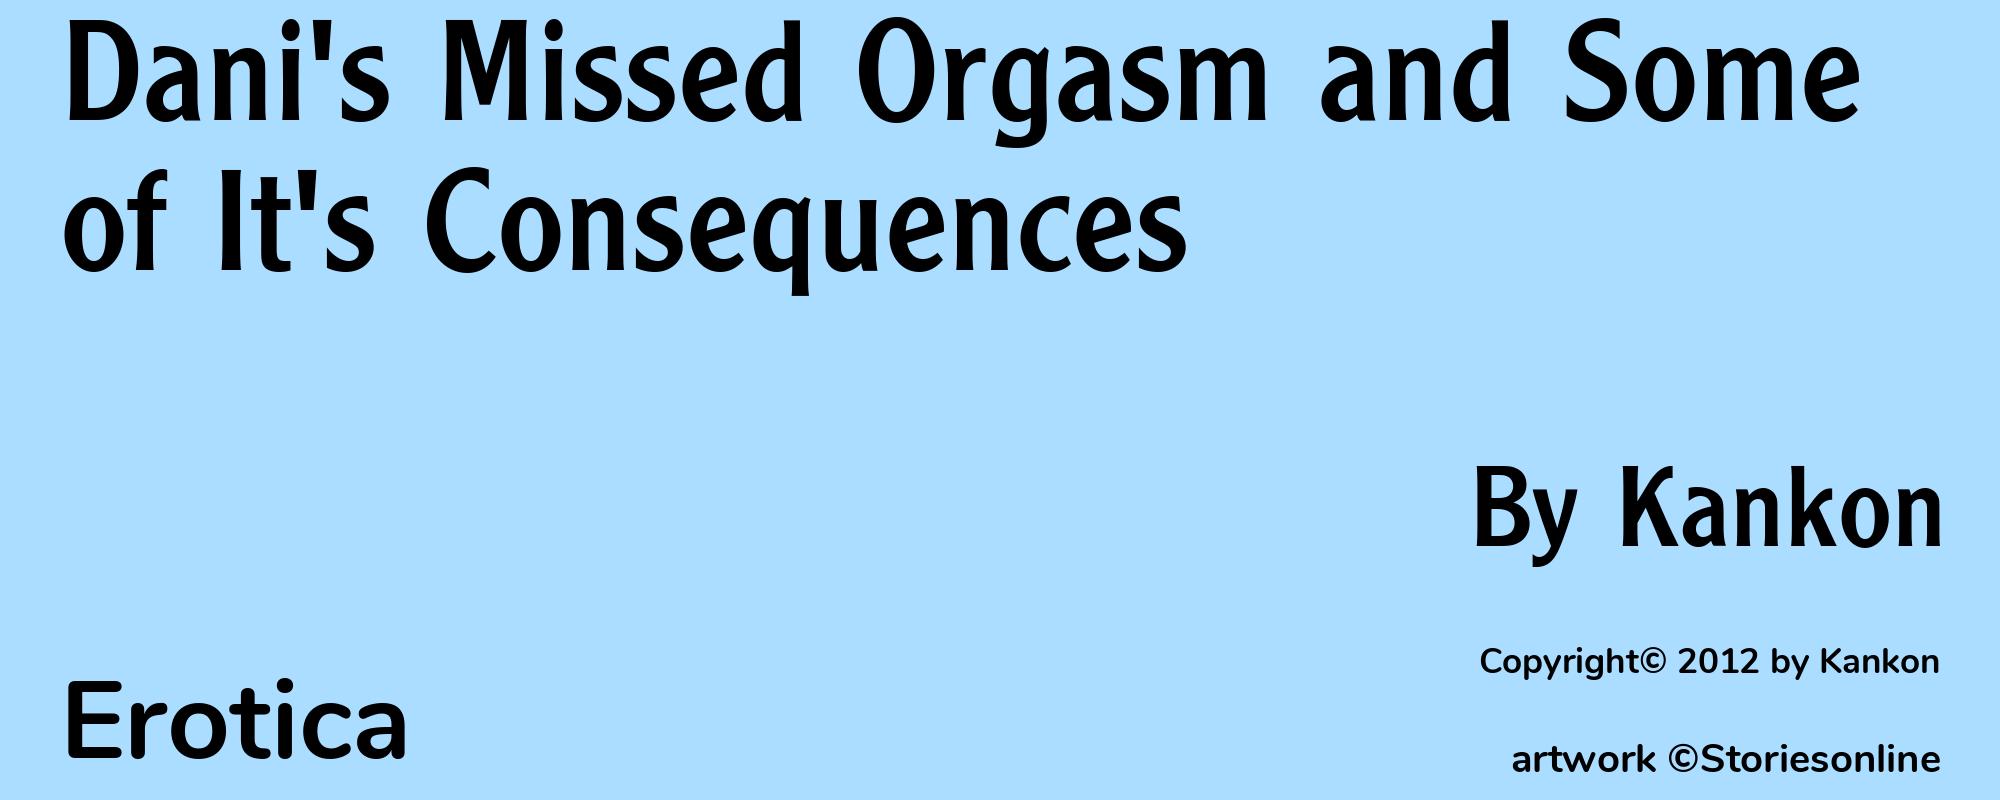 Dani's Missed Orgasm and Some of It's Consequences - Cover